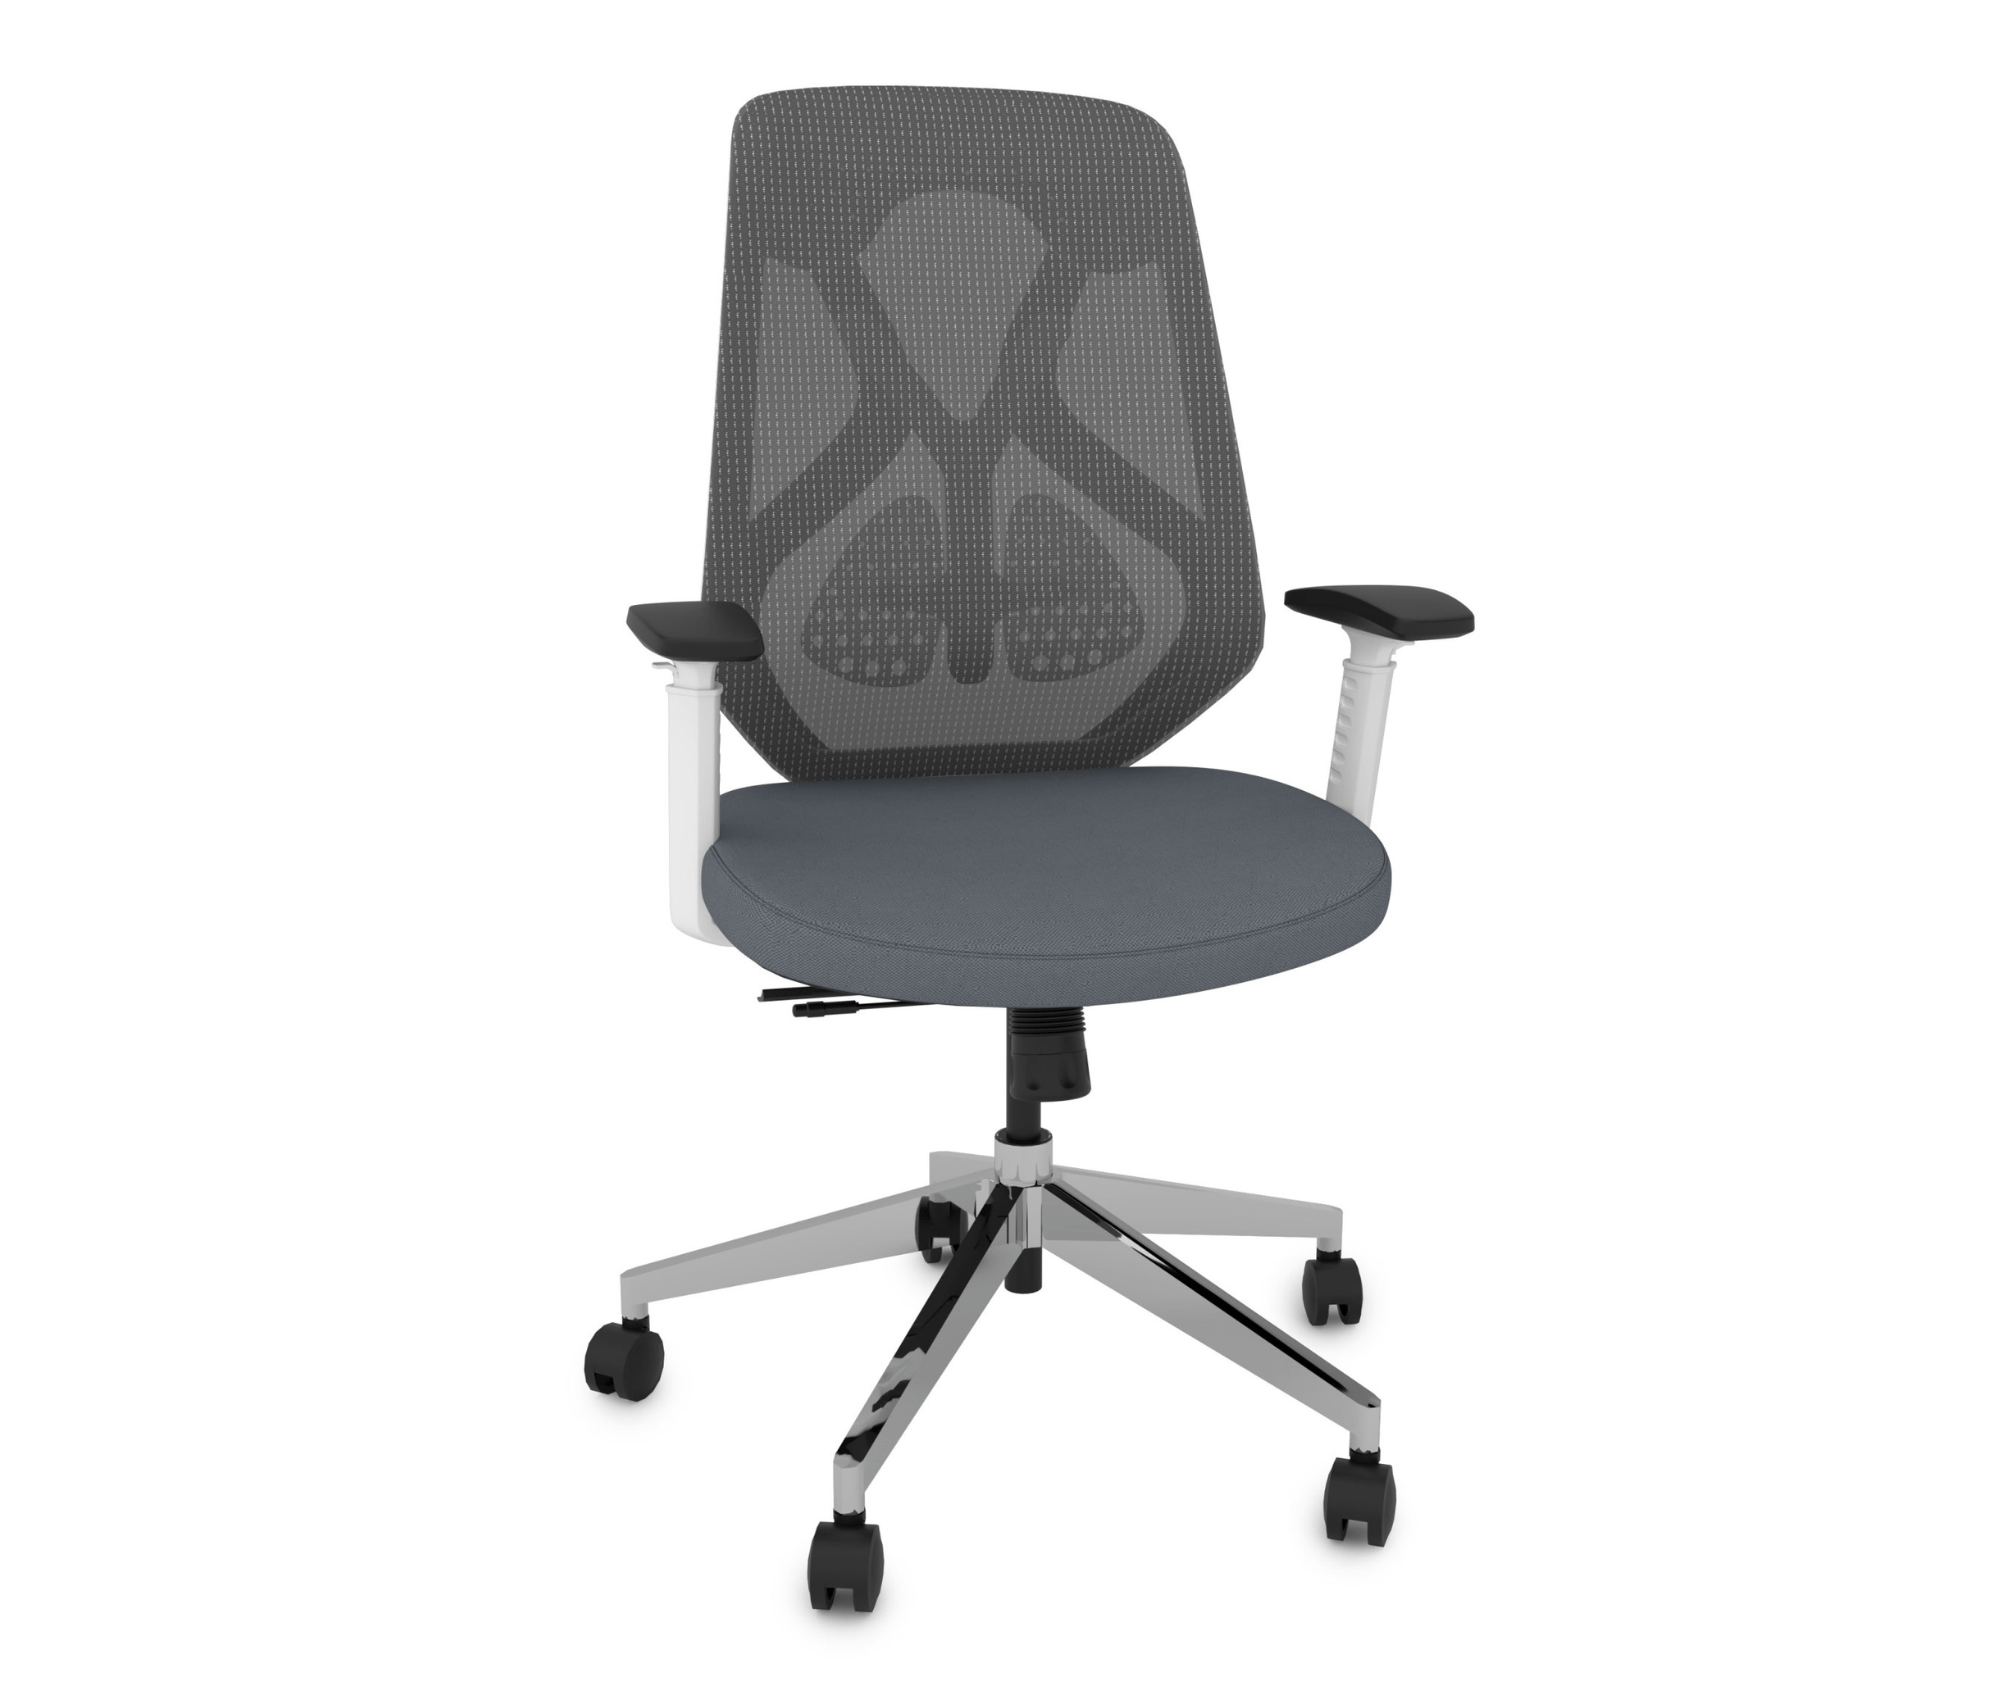 Ergonomic Plus Chair | Posture-Correcting Office Chair Porvata Office Chairs Slate